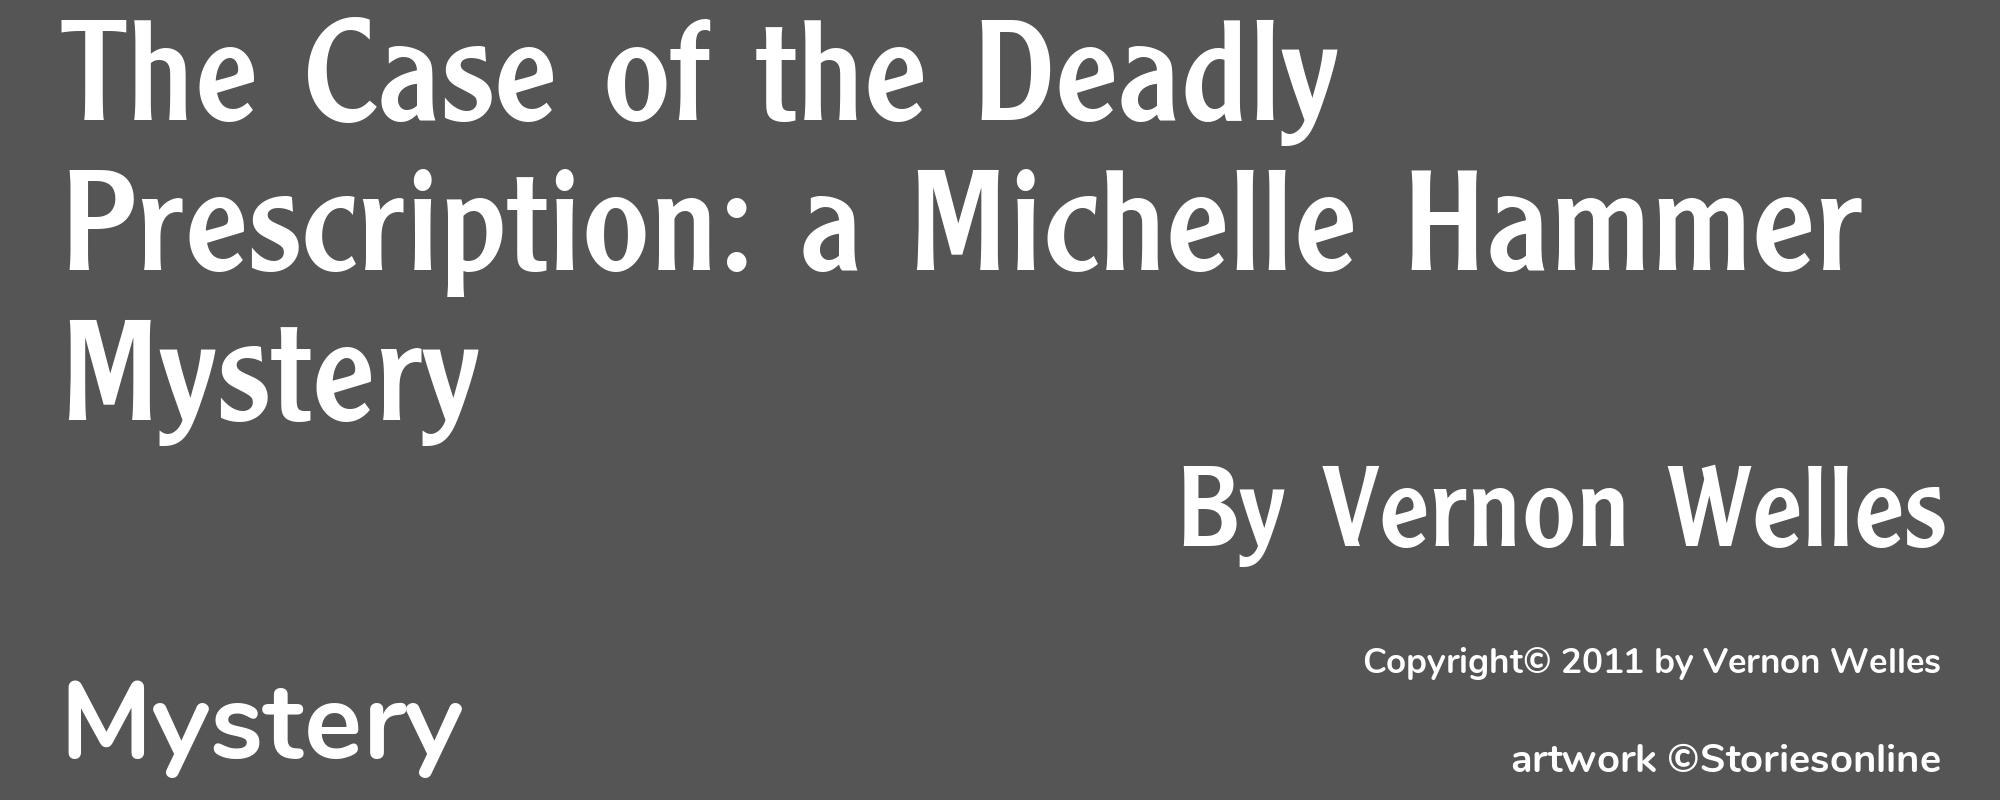 The Case of the Deadly Prescription: a Michelle Hammer Mystery - Cover